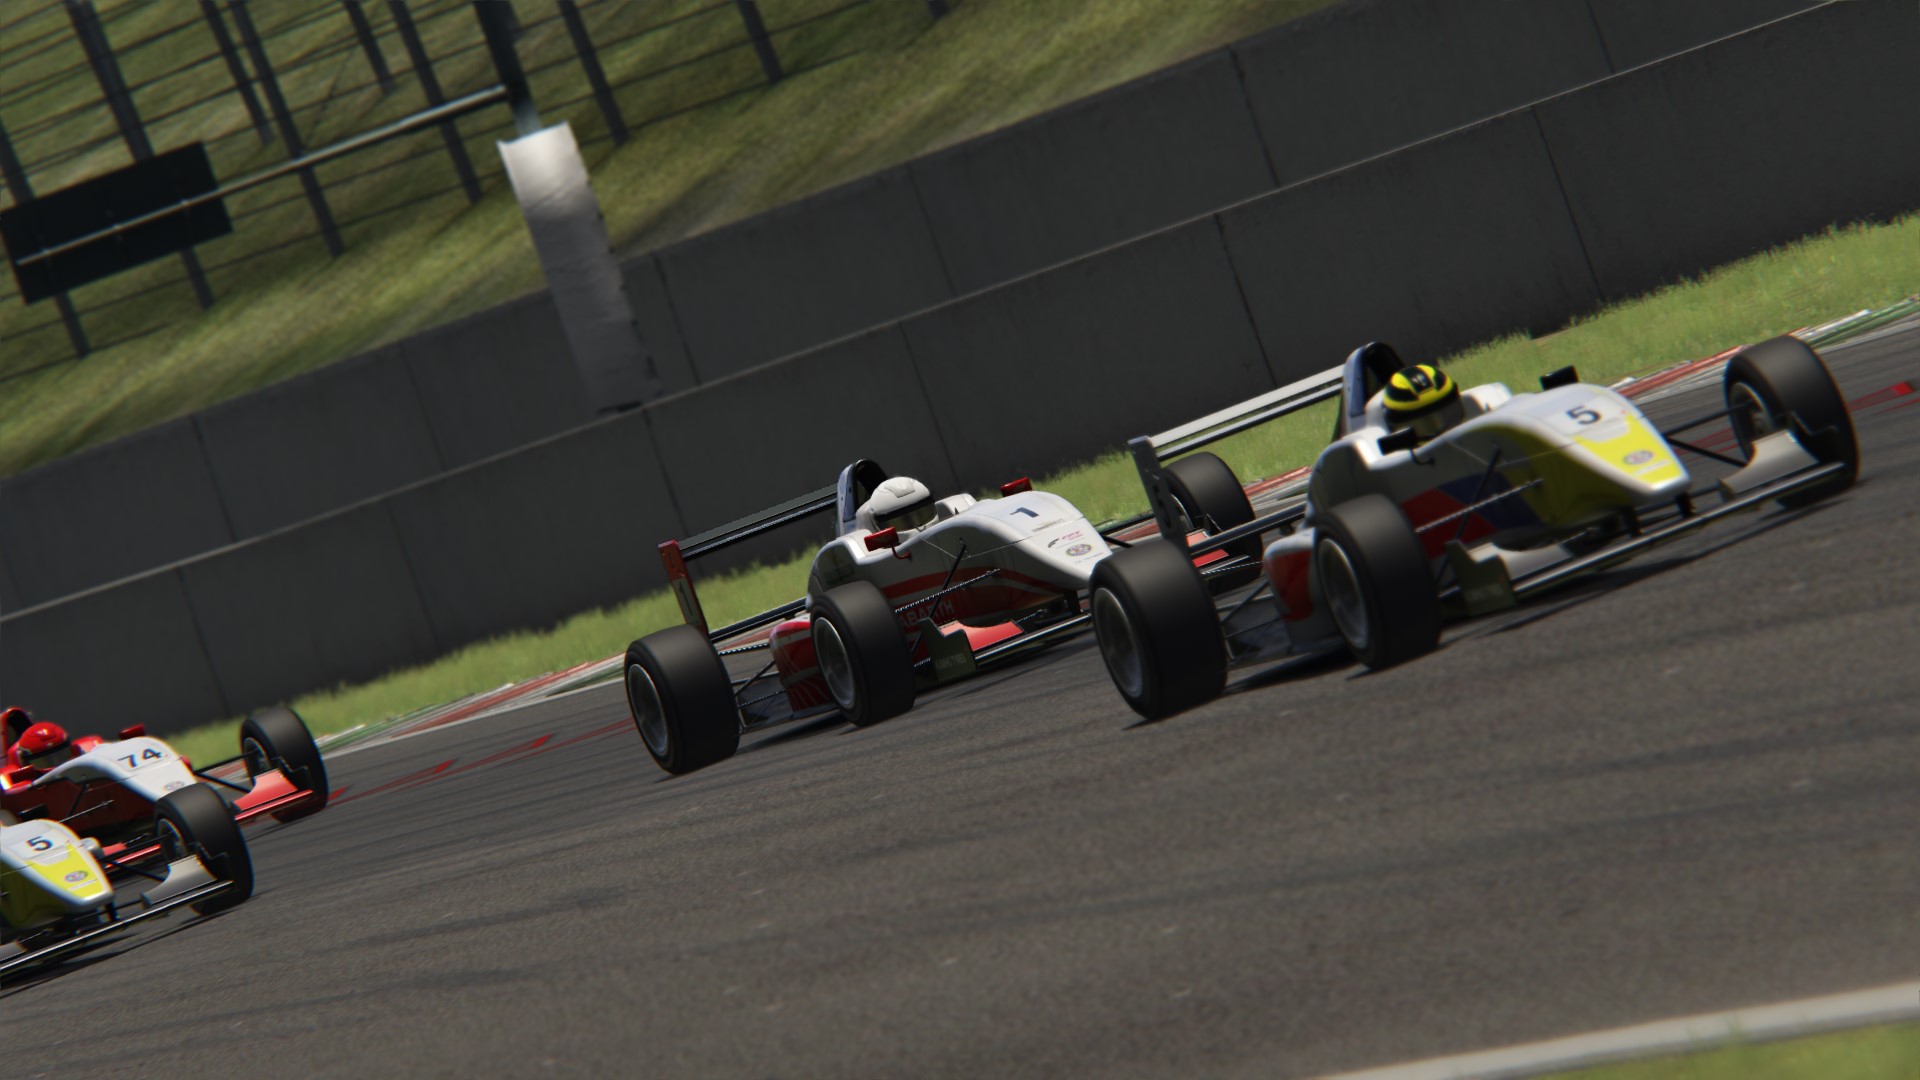 The standard Assetto Corsa graphics come up to par with other modern titles.